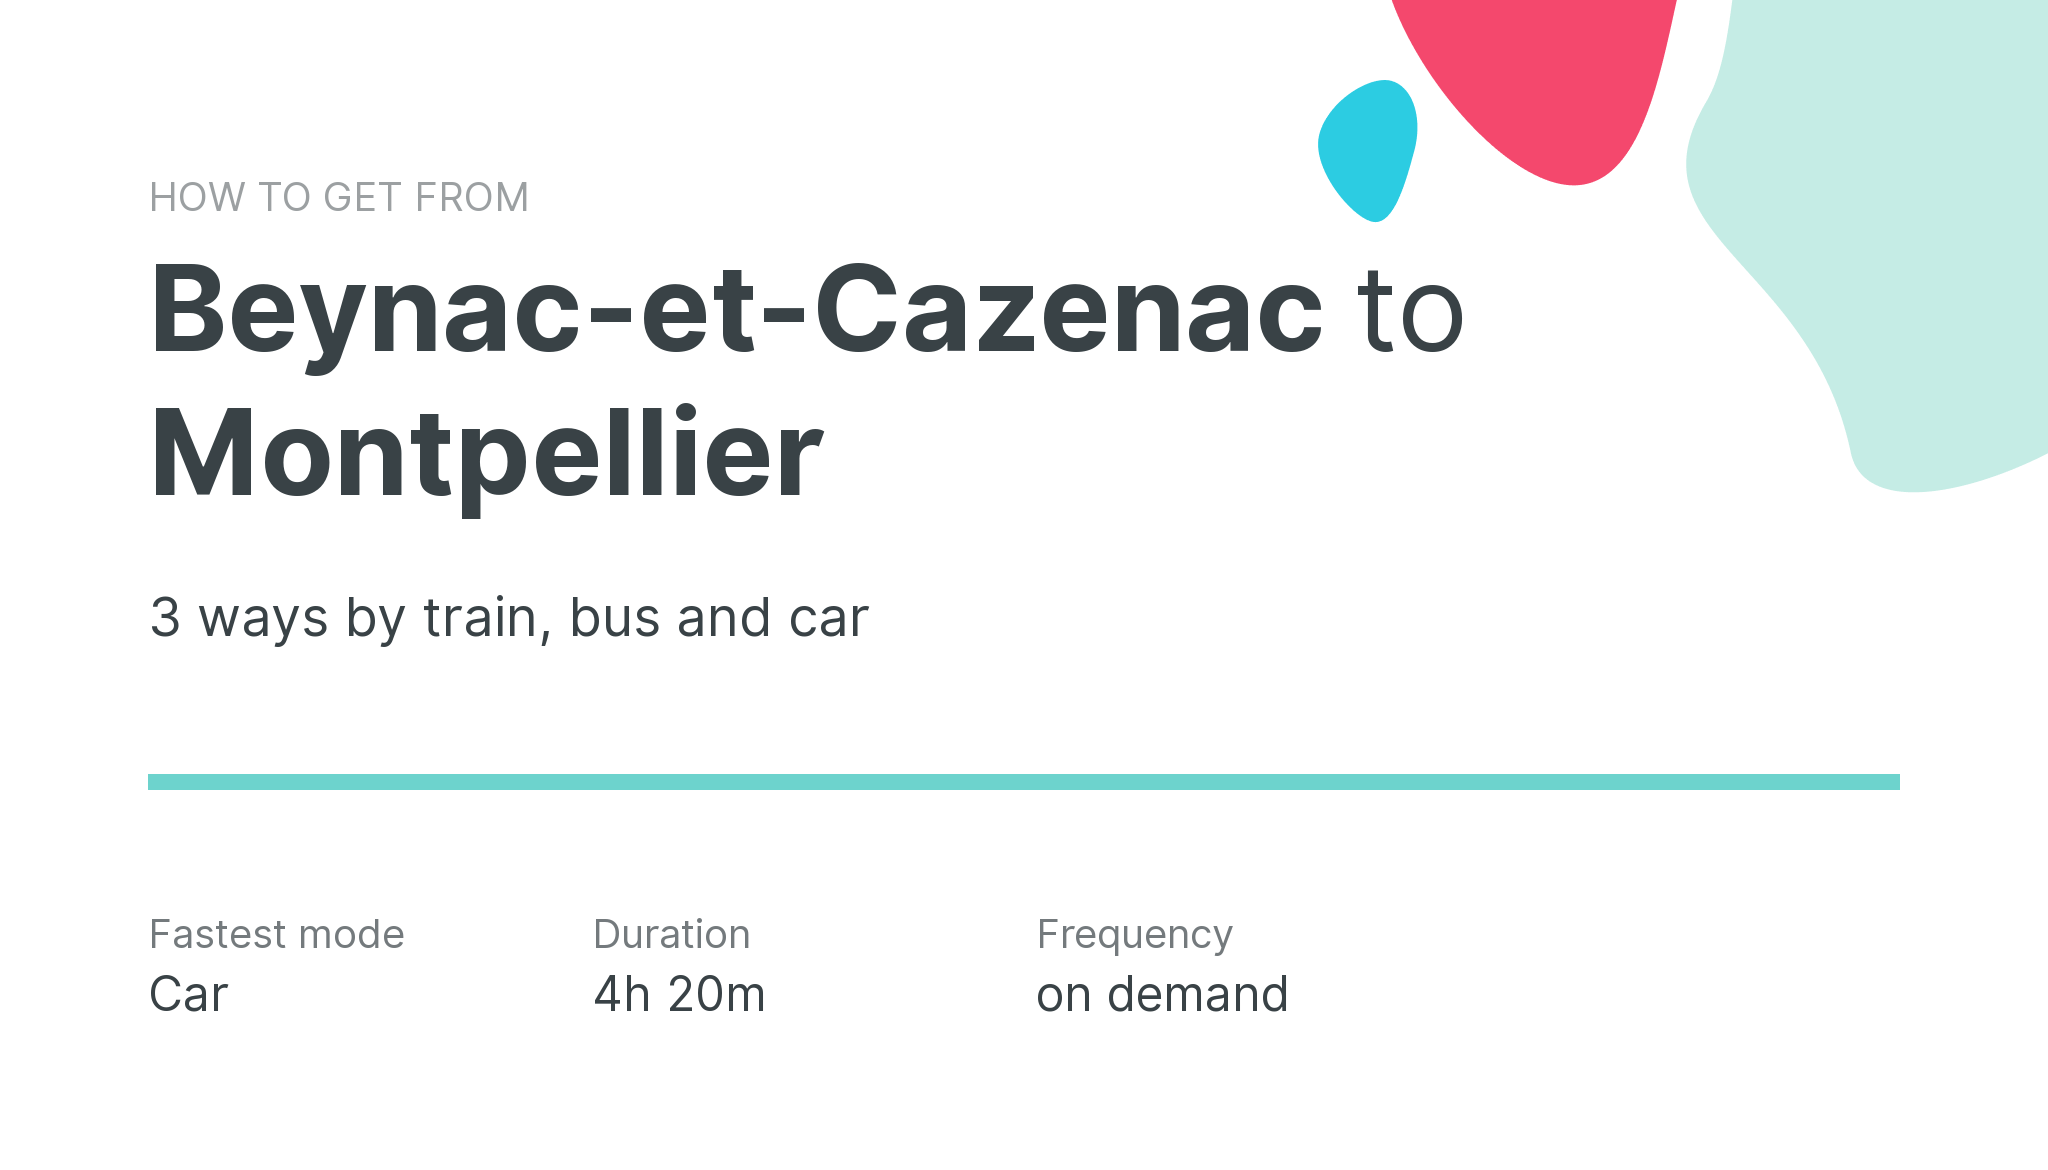 How do I get from Beynac-et-Cazenac to Montpellier